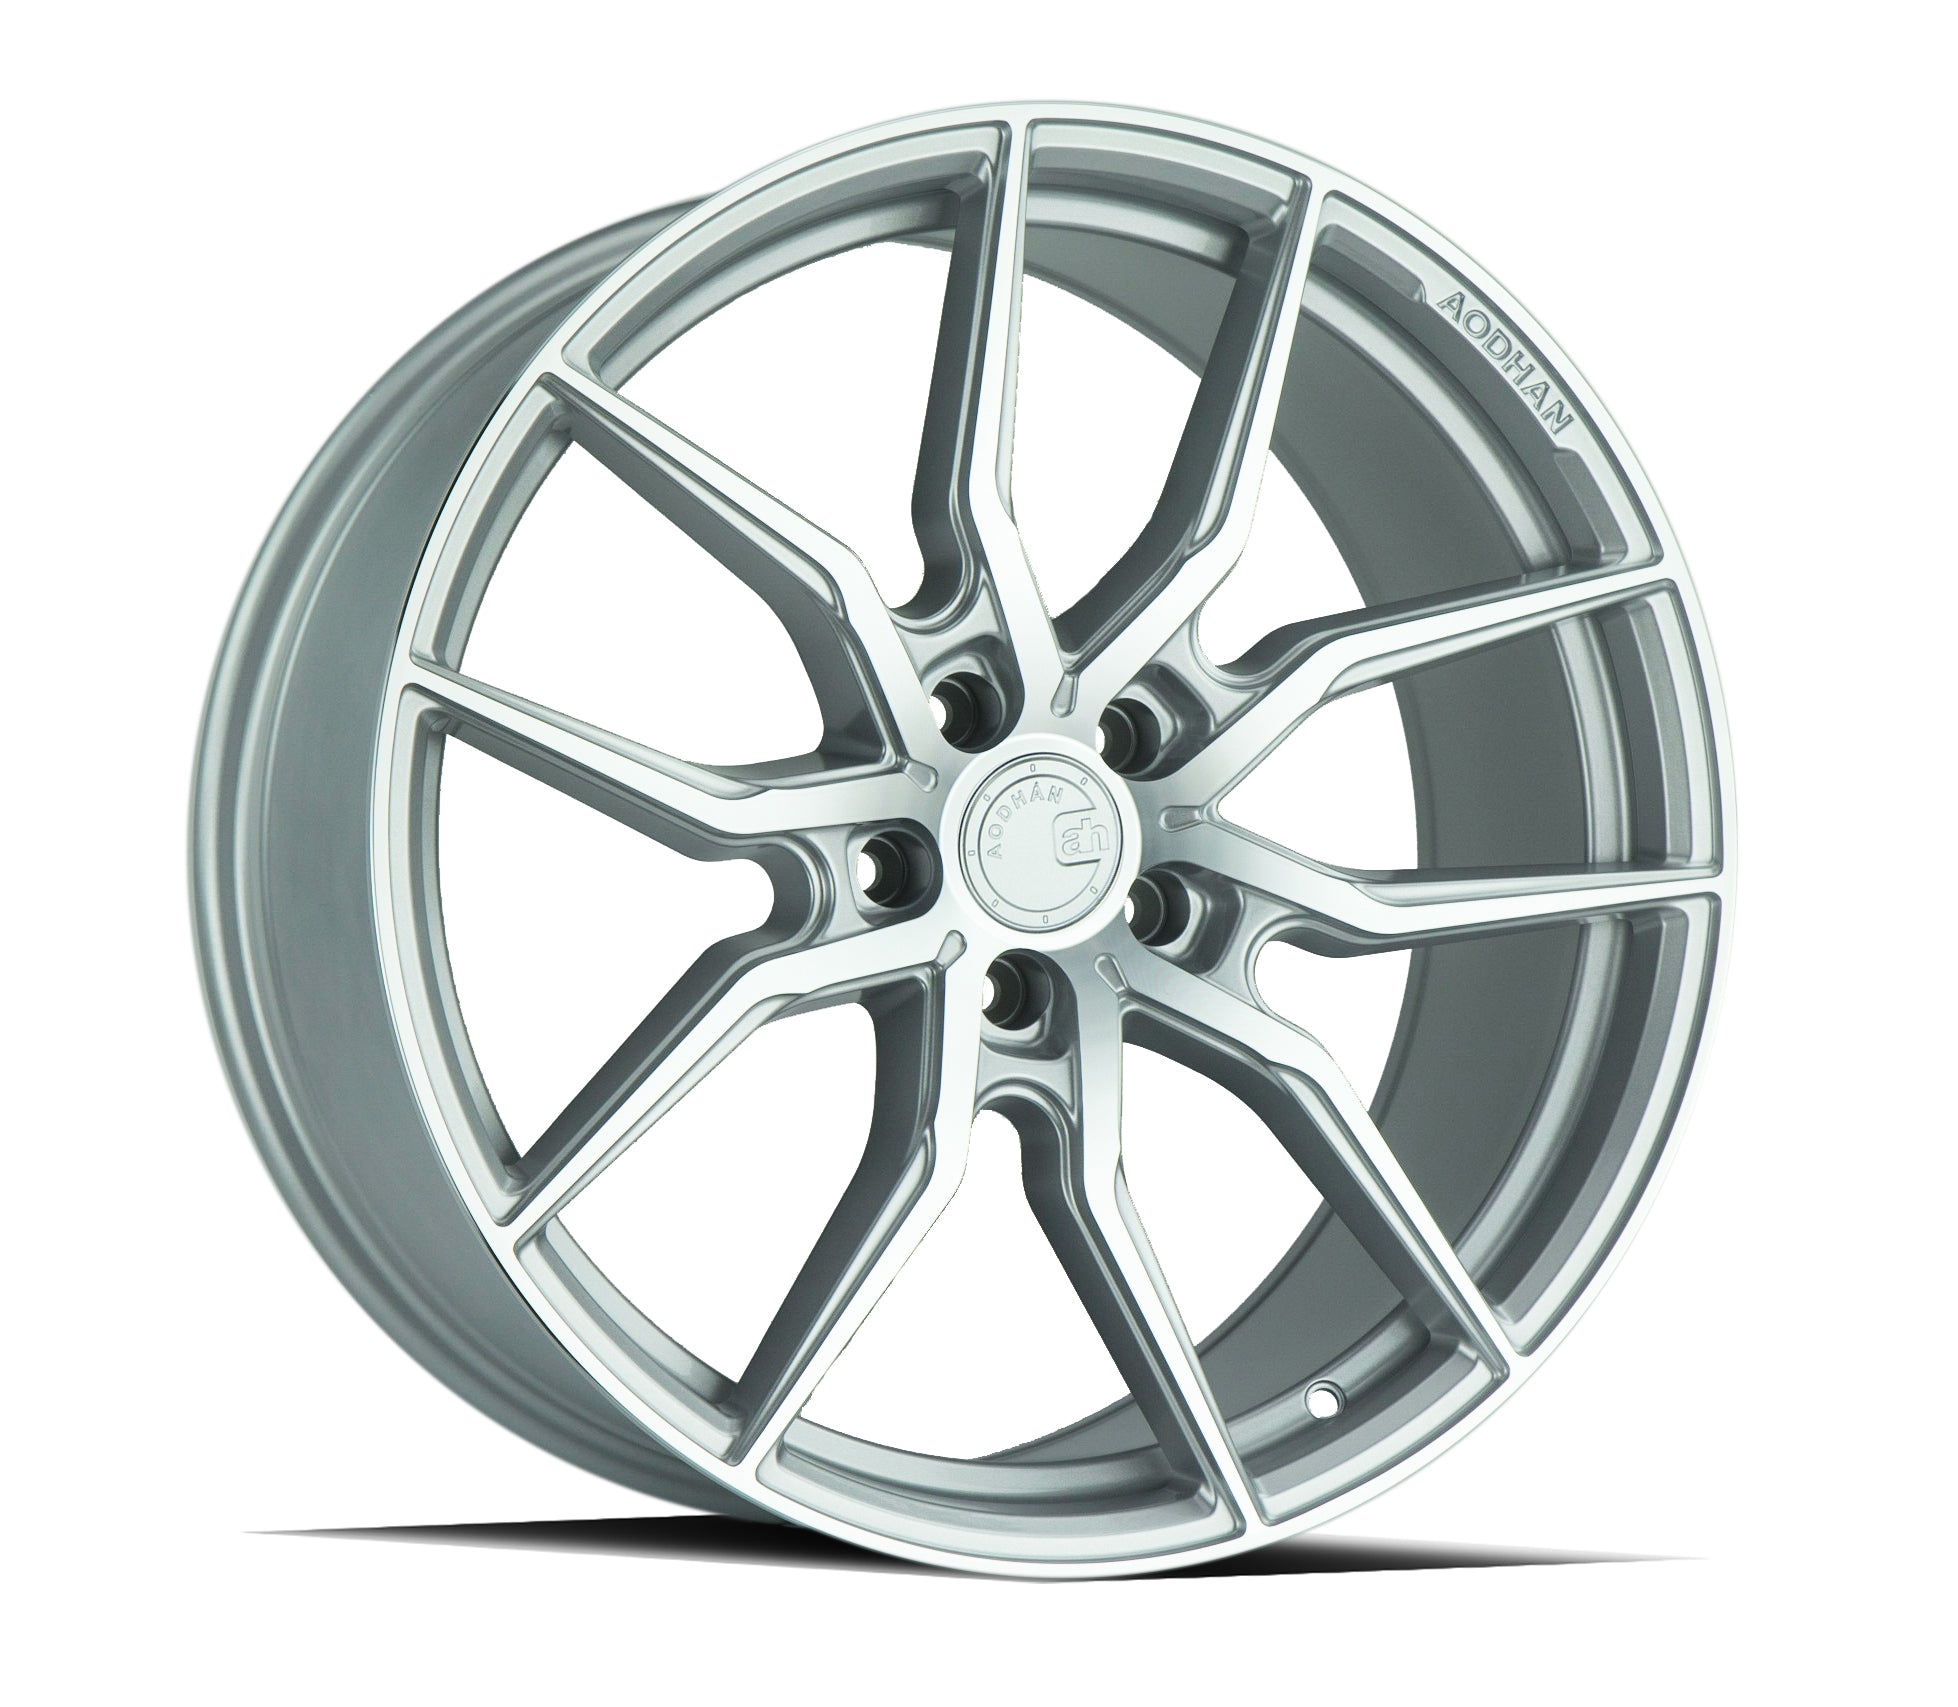 Aodhan AFF1 20x9 5x120 +30 Gloss Silver Machined Face